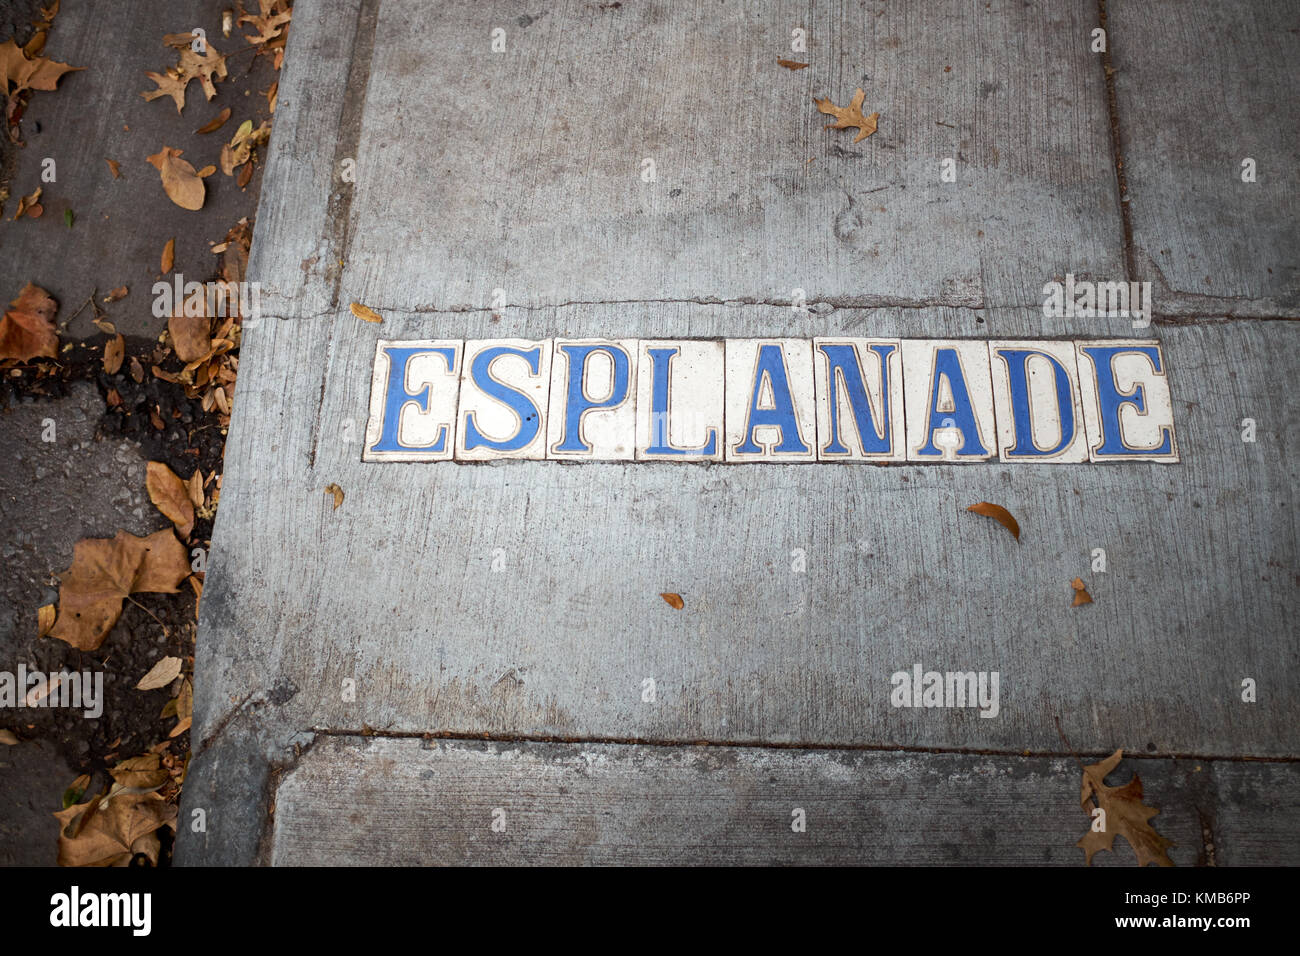 Esplanade place in blue and white letters name set into a concrete sidewalk with fallen dead brown autumn leaves Stock Photo